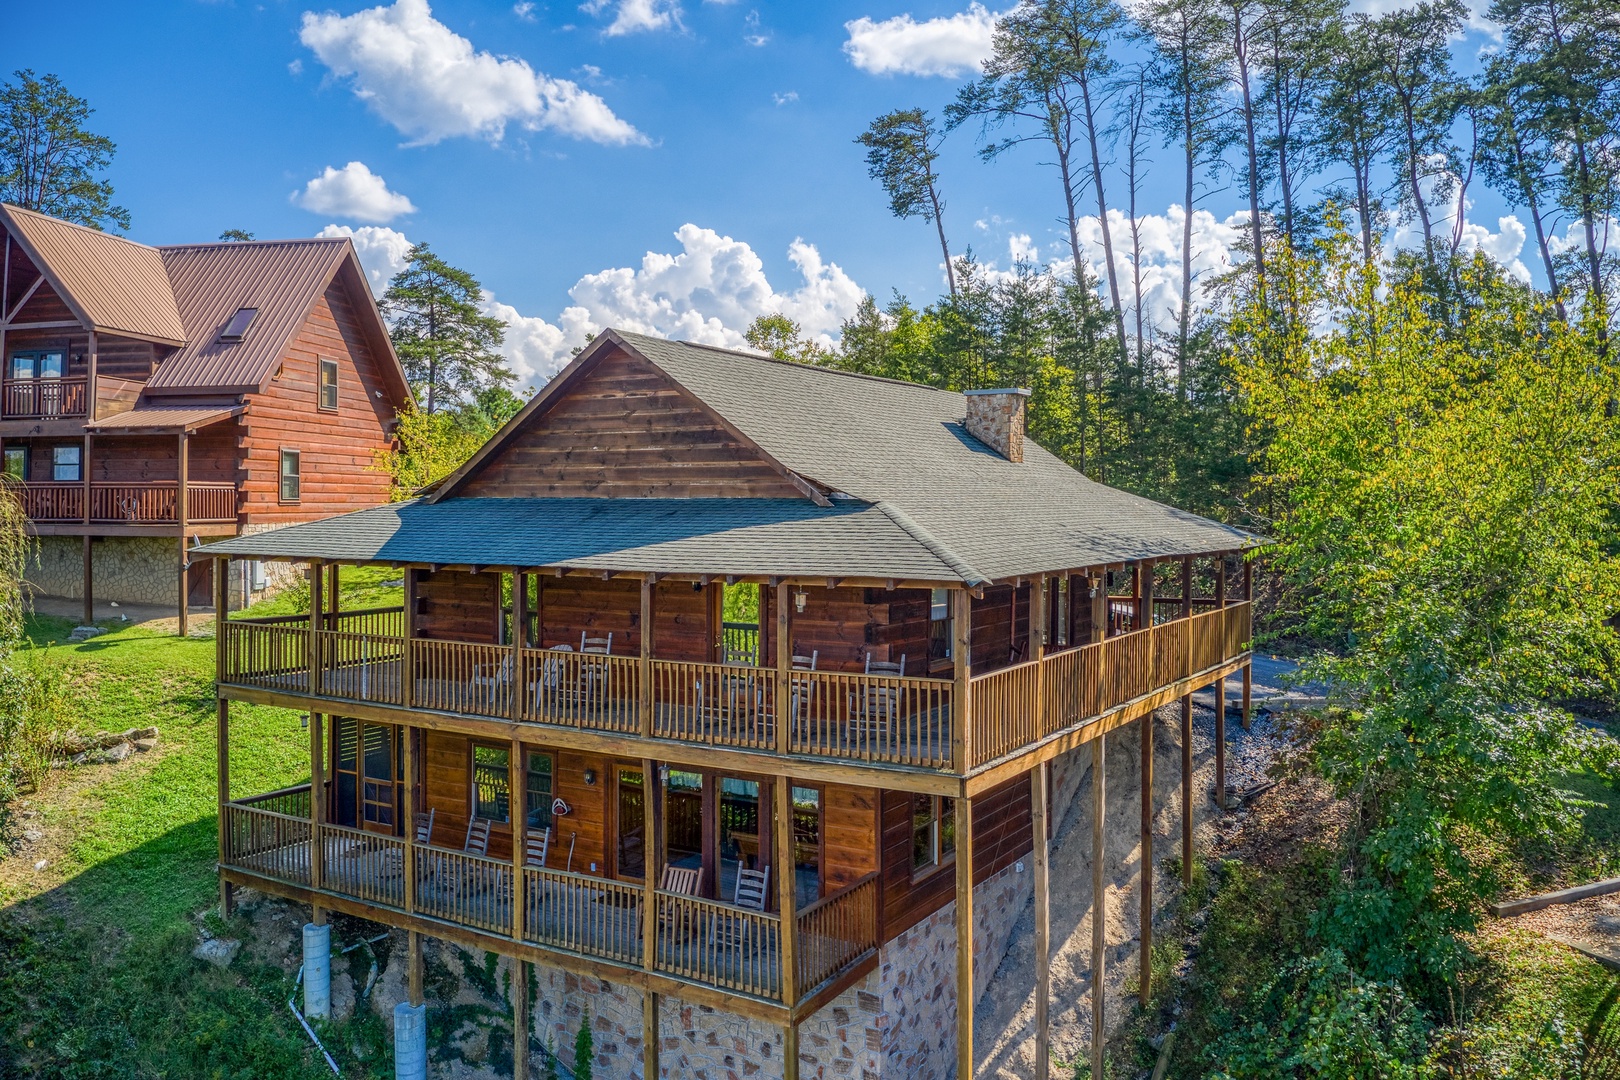 Exterior drone view at Bear Country, a 3-bedroom cabin rental located in Pigeon Forge